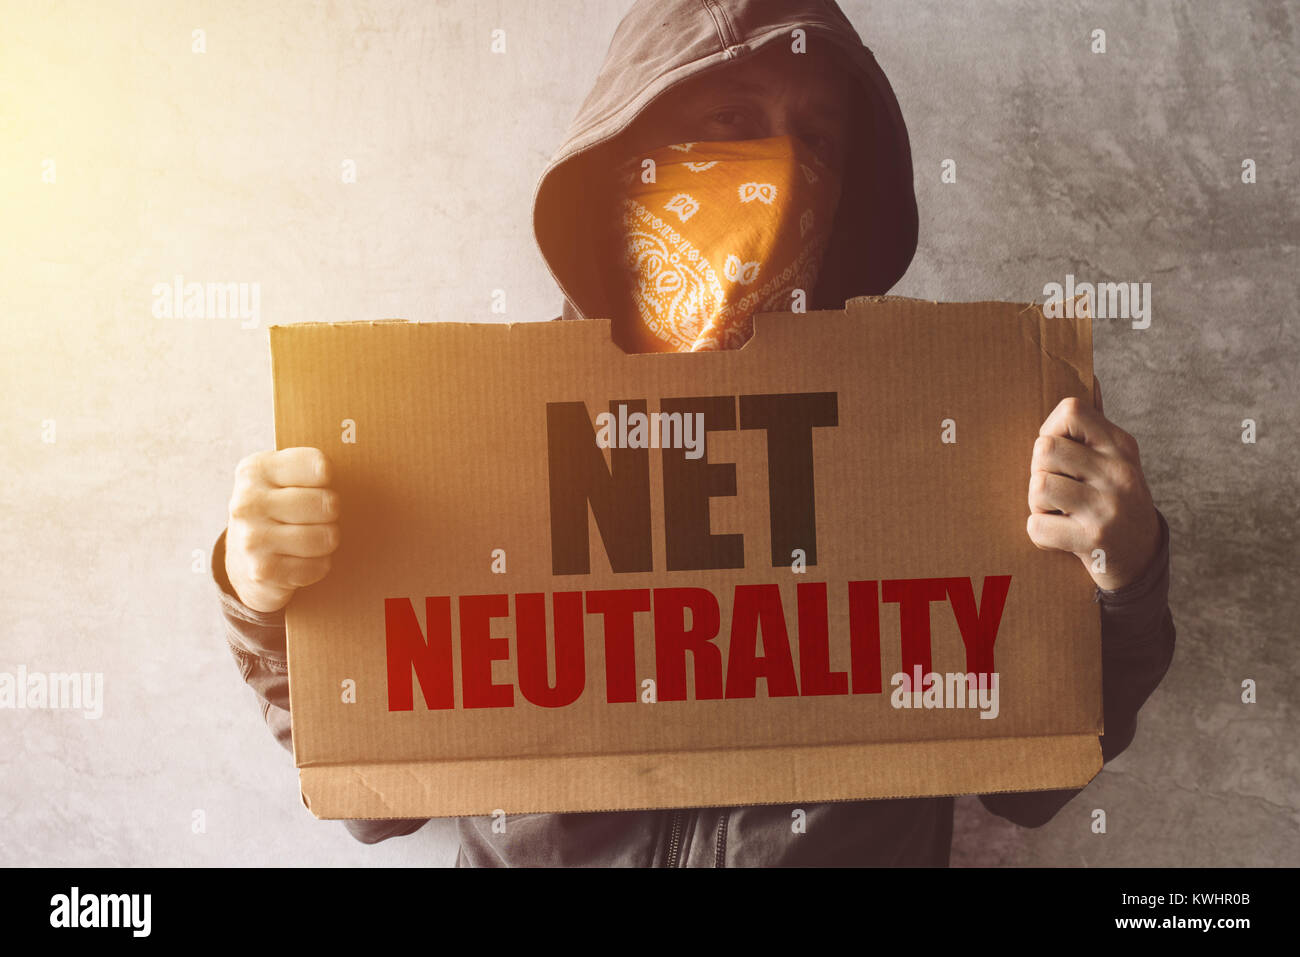 Hooded activist protester holding Net neutrality protest sign. Man with hoodie and scarf over face taking part in activism and fighting for the cause. Stock Photo